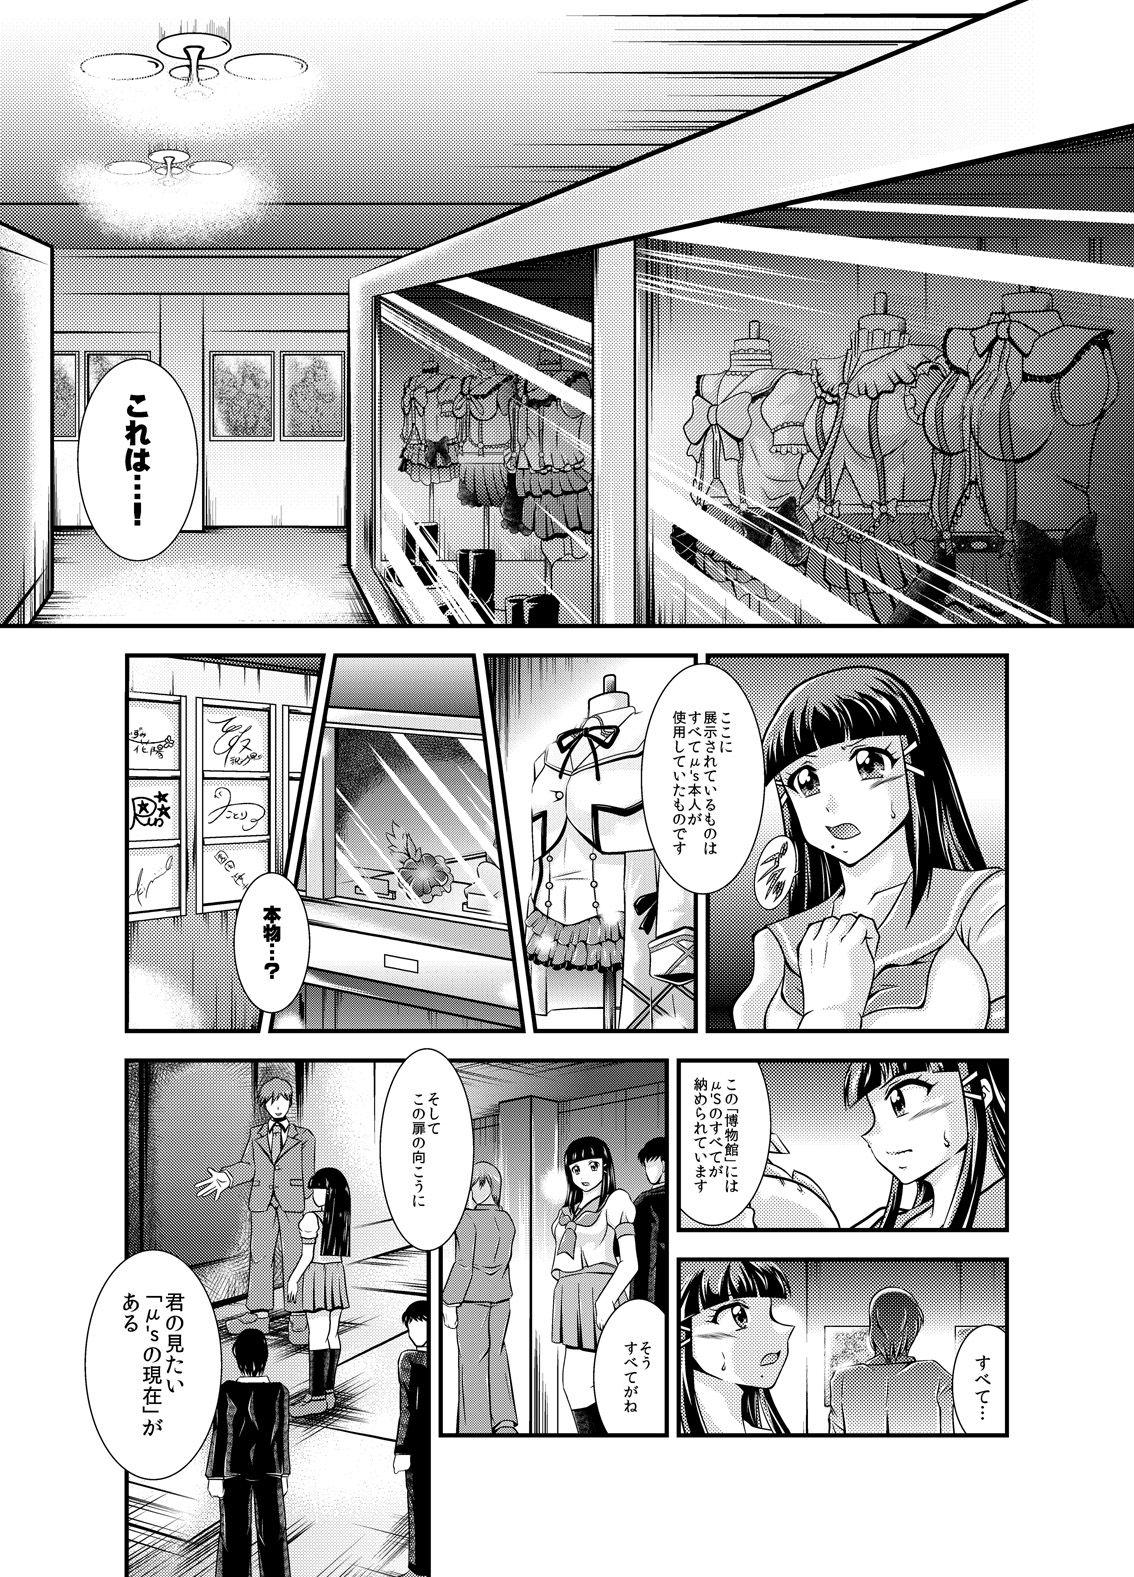 Jerk Off ProjectAqours EP02:"M"EMORIES - Love live Adult - Page 5